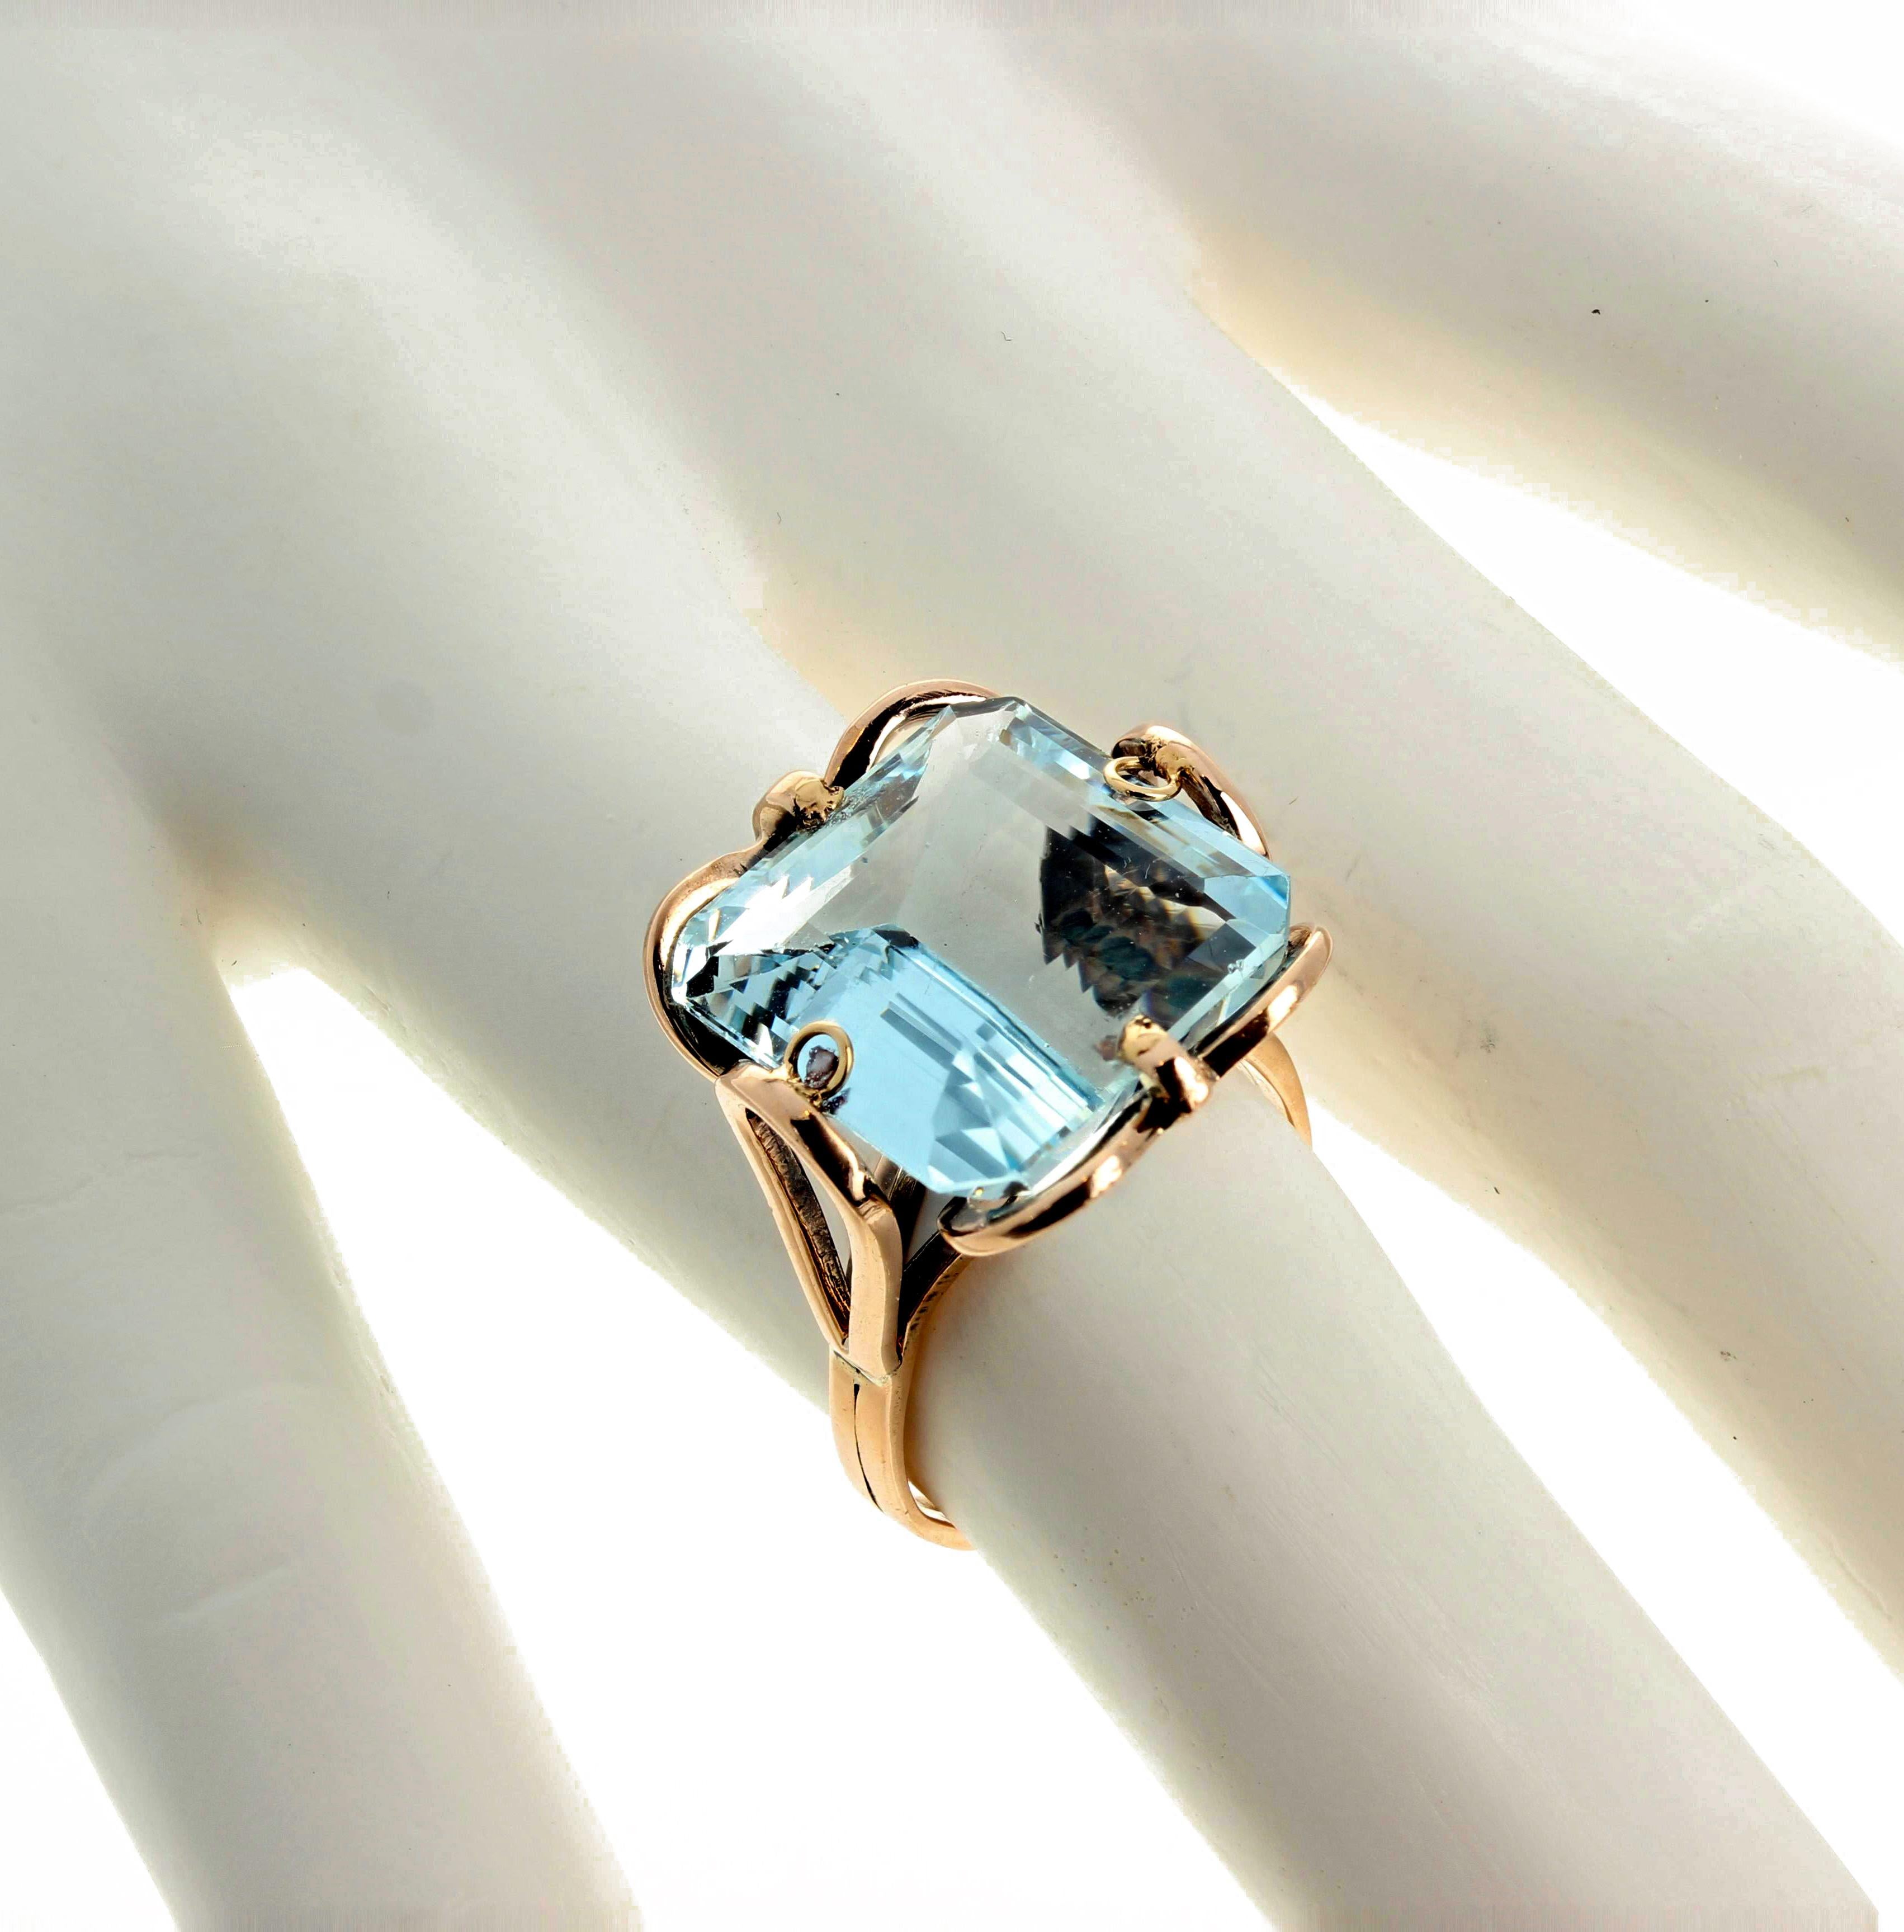 Glittering cushion cut 11.75 carat natural Aquamarine (15 mm x 14.5 mm) set in a unique 10 Kt yellow gold ring size 7 (sizable).  More from this jeweler by putting Gemjunky into your 1stDibs search bar.  